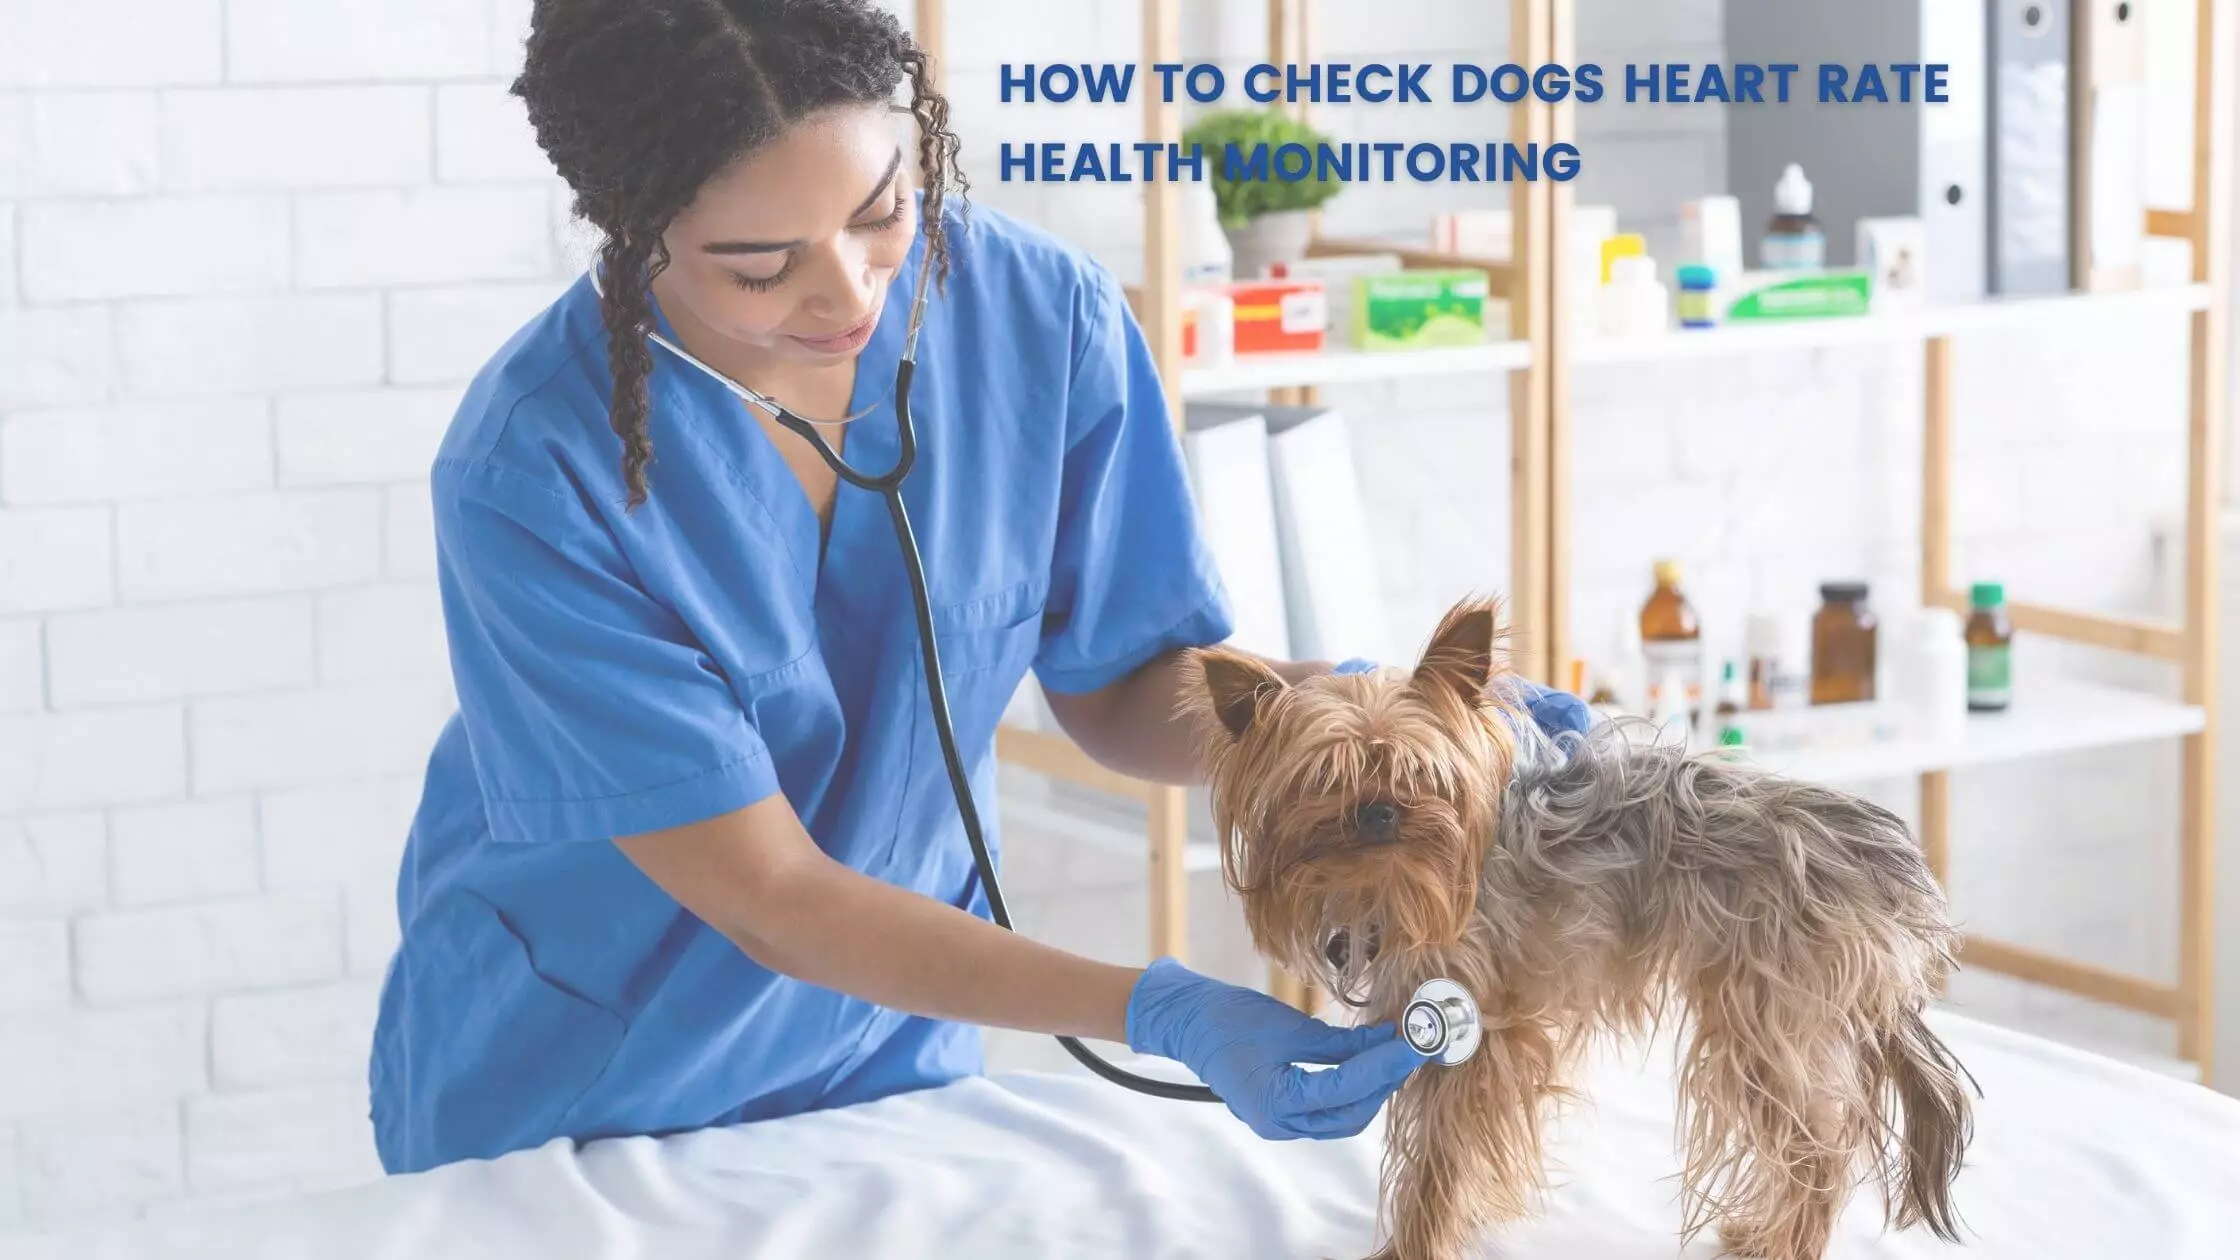 How to Check Dogs Heart Rate